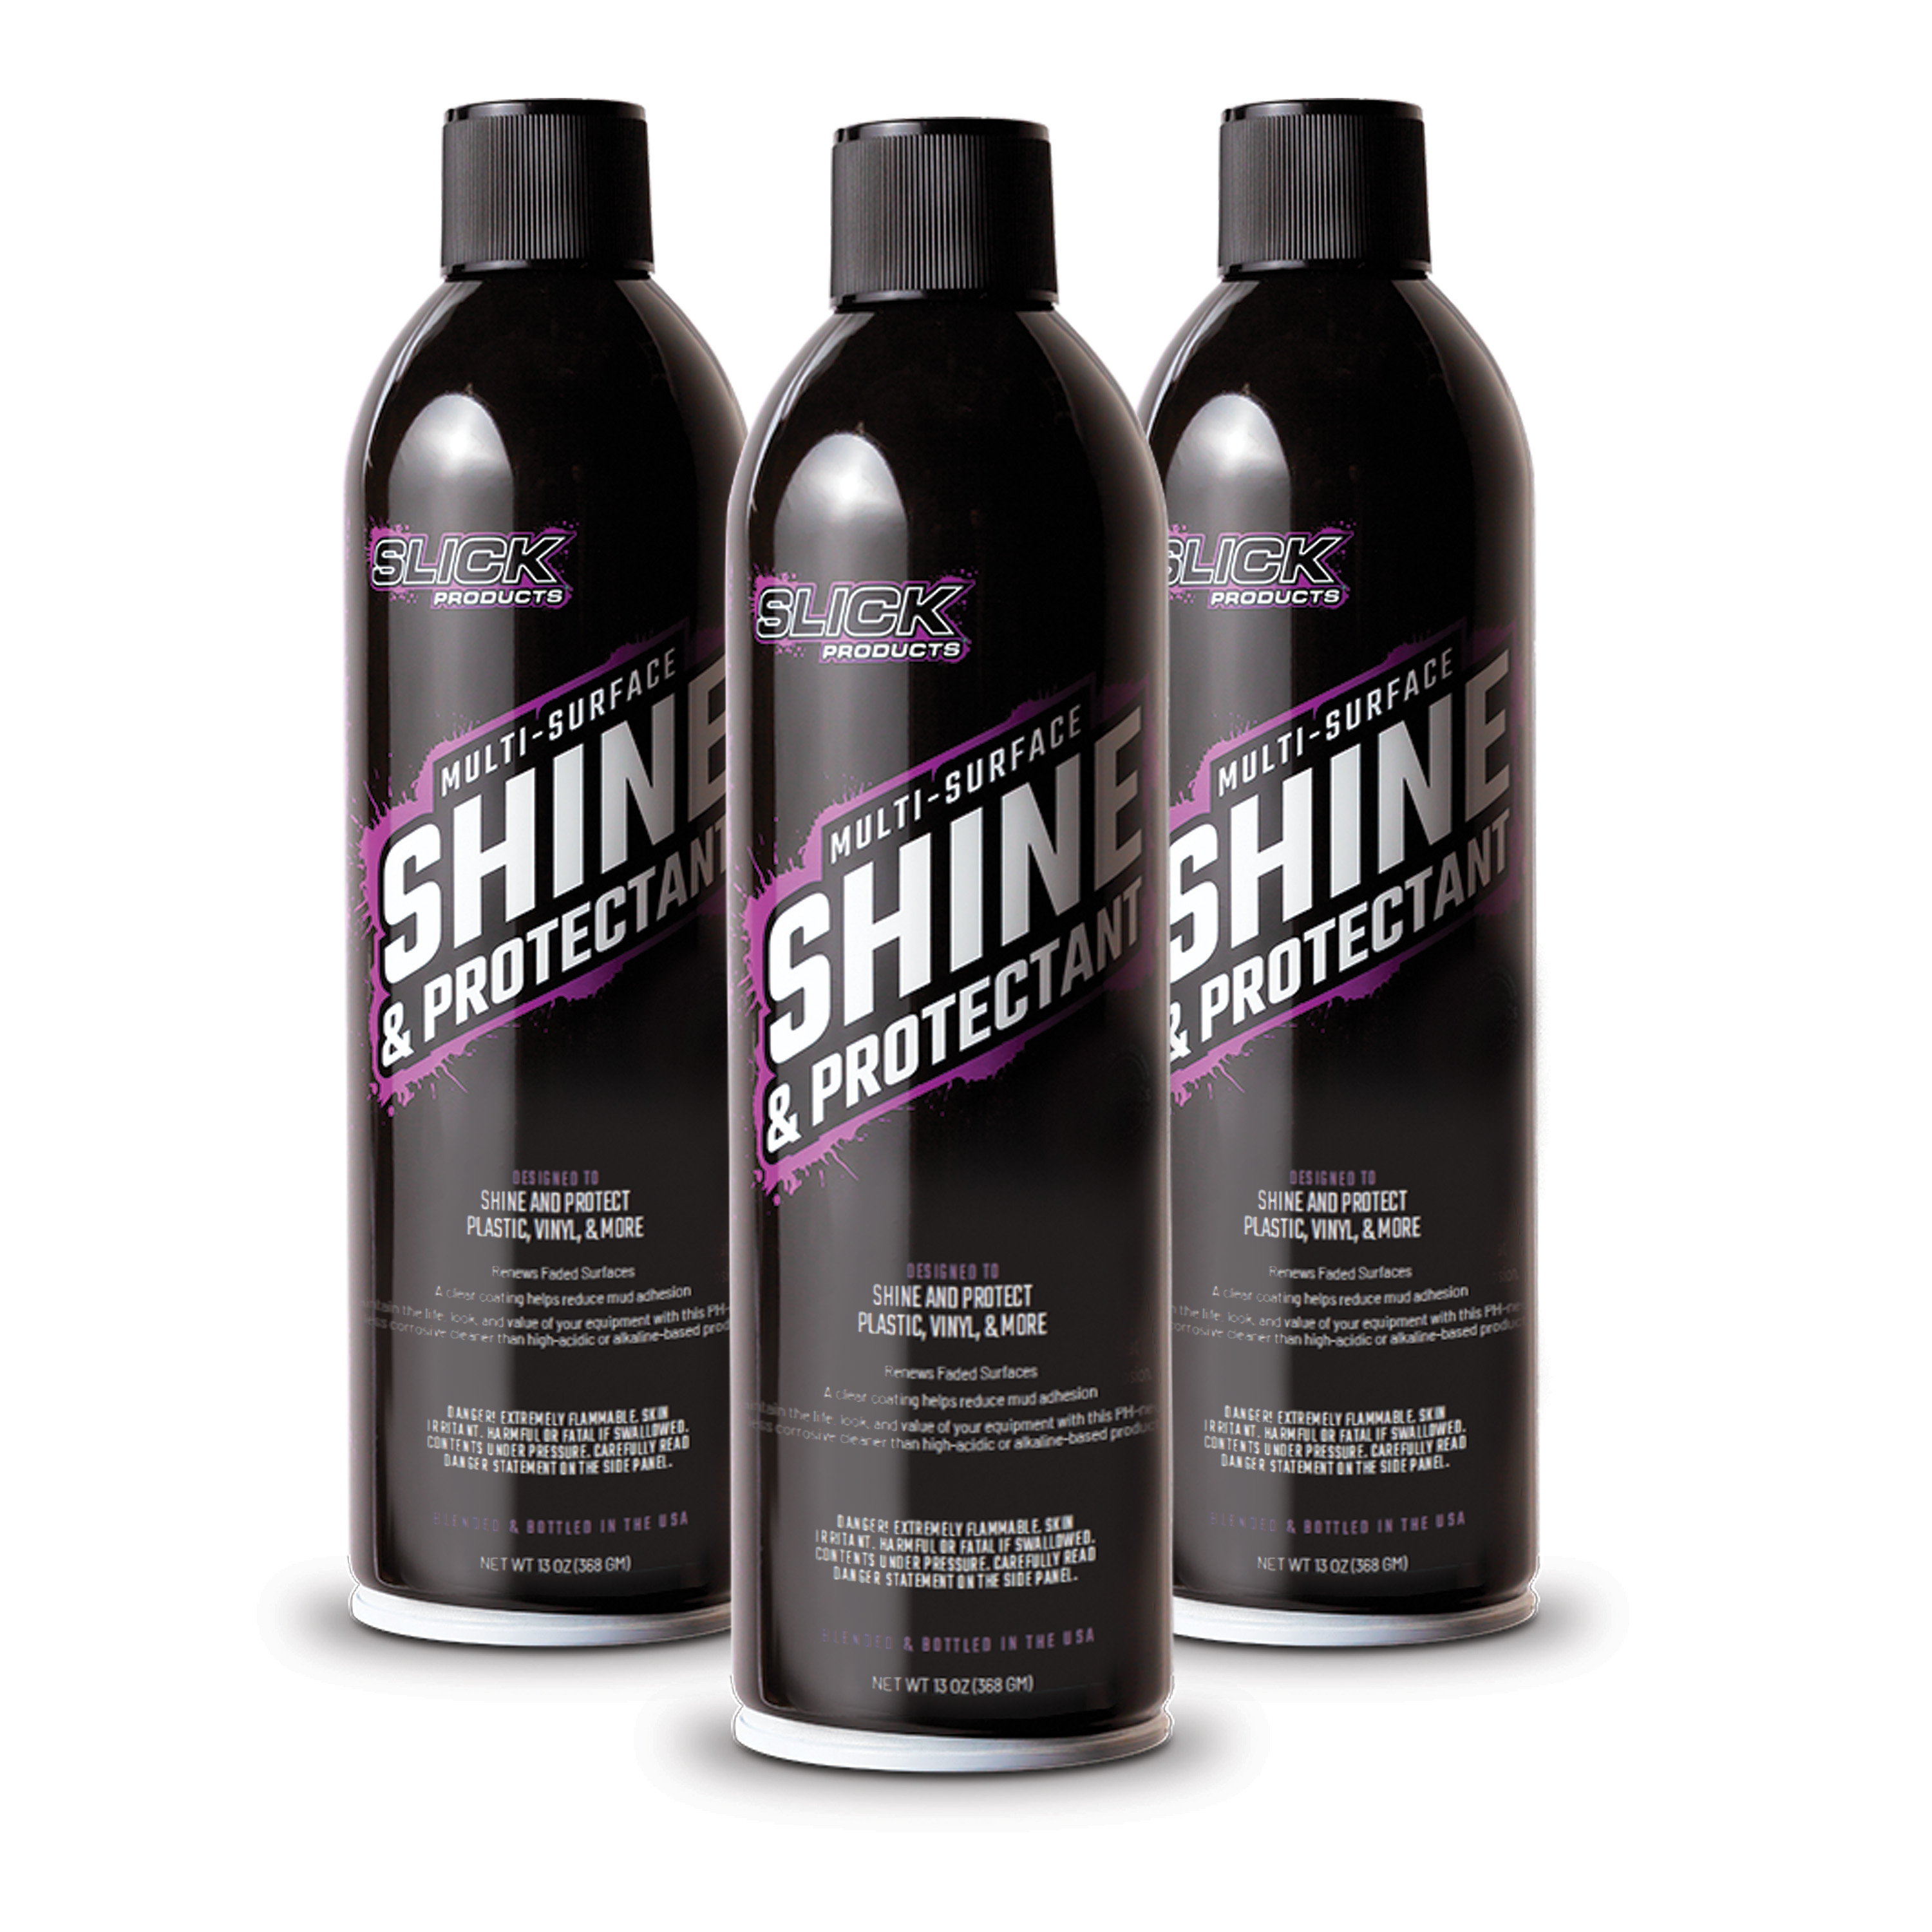 Live - Slick Products Shine & Protect Demo Video